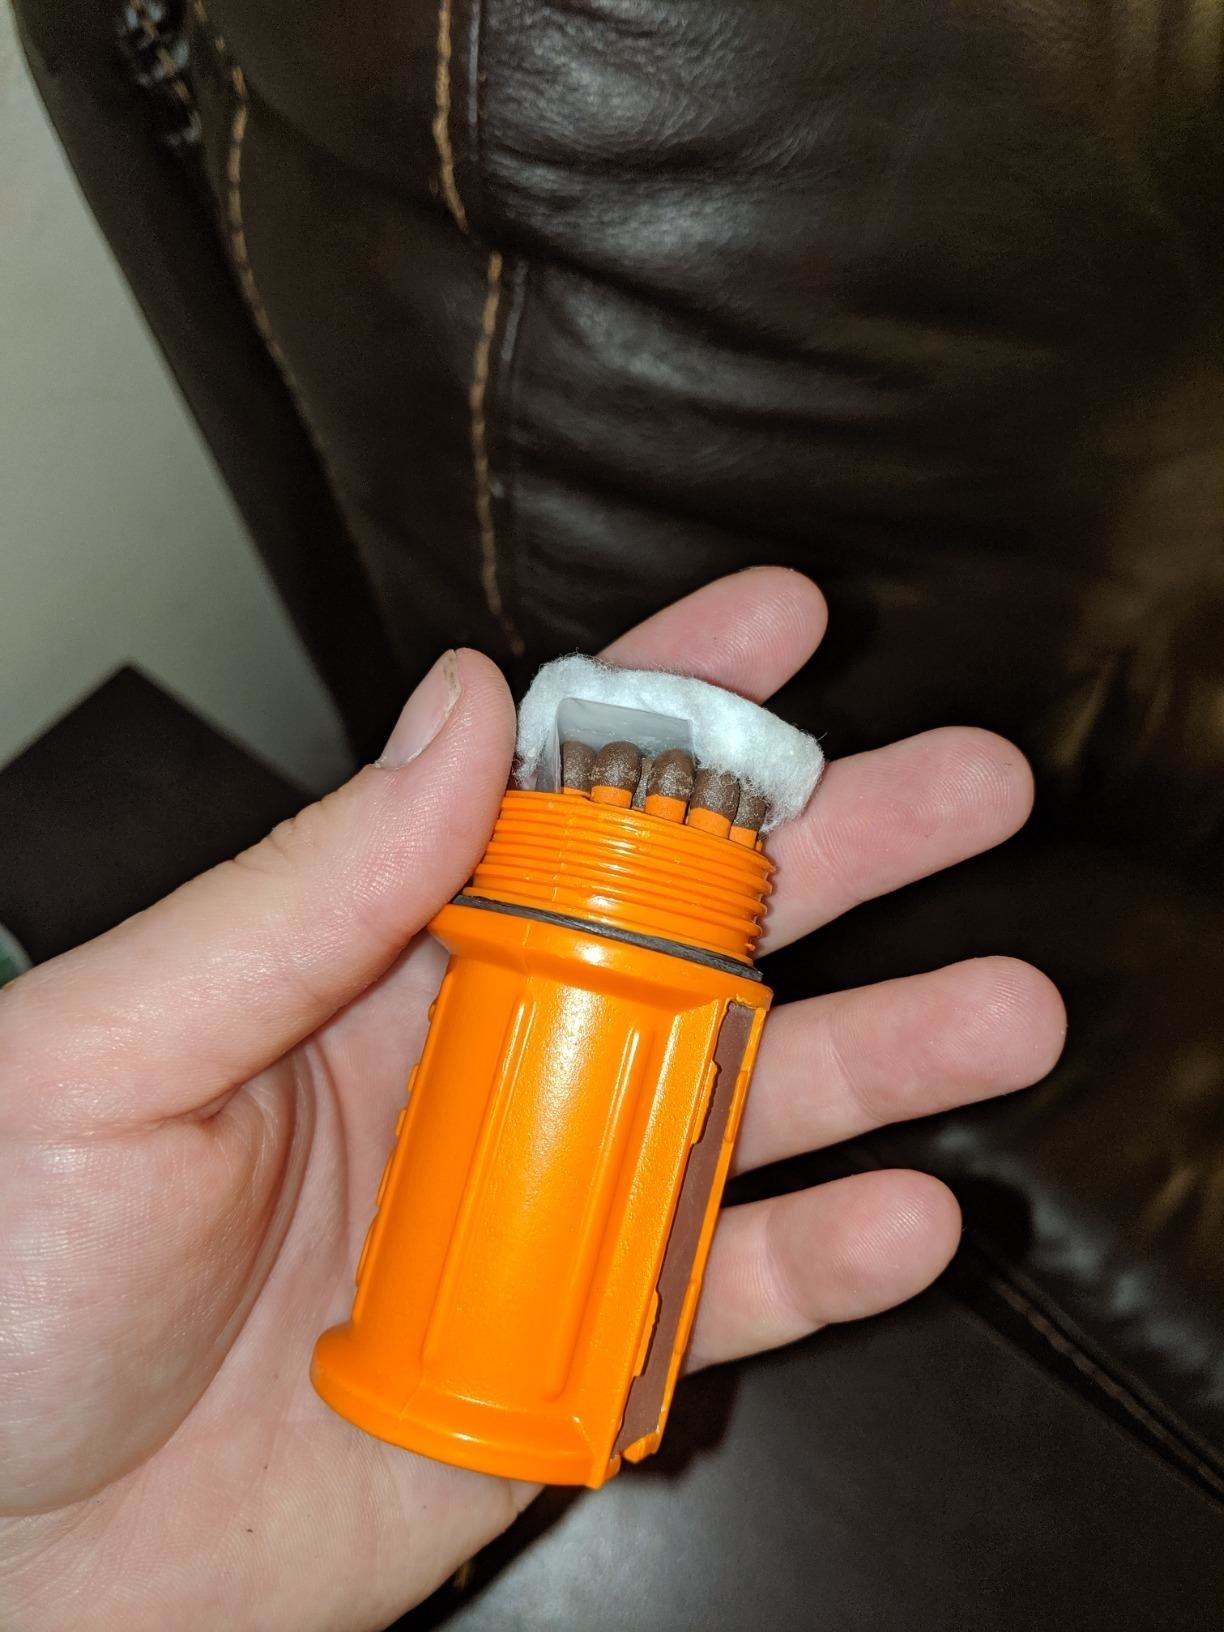 A customer holds his orange UCO Stormproof Match Kit with Waterproof Case